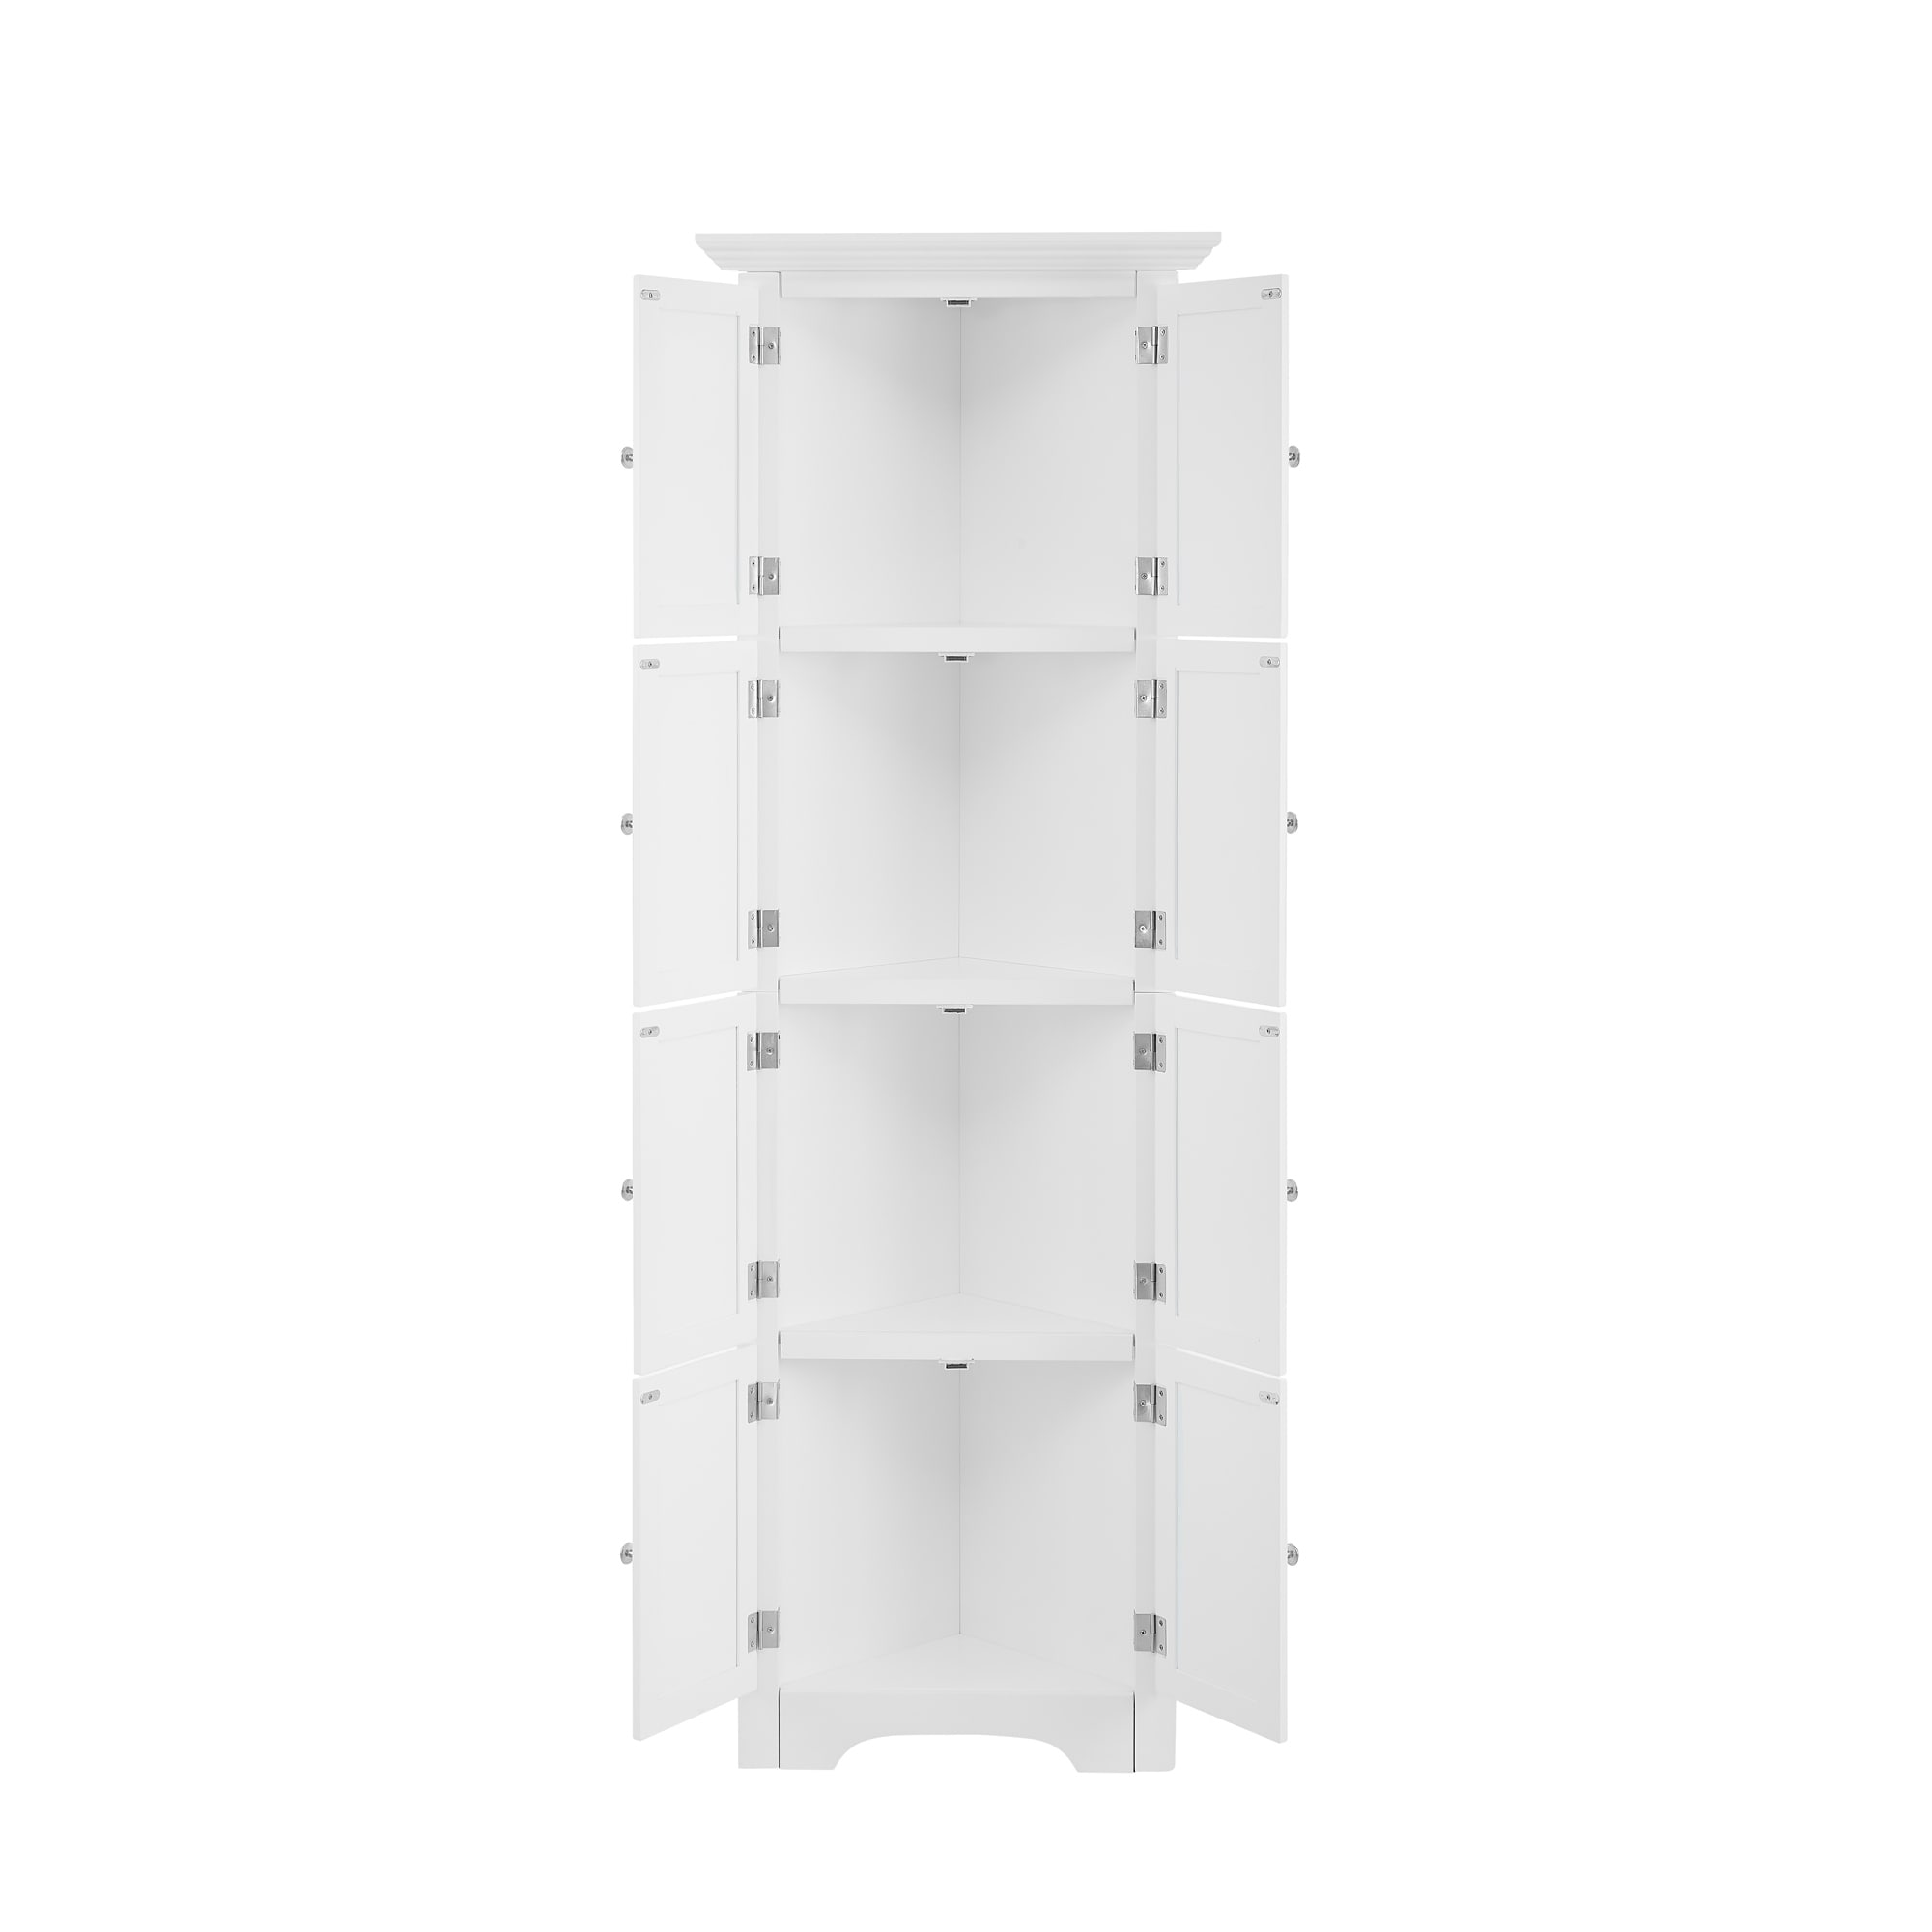 Tall Corner Storage Cabinet with Shelves & Doors Large Storage Space